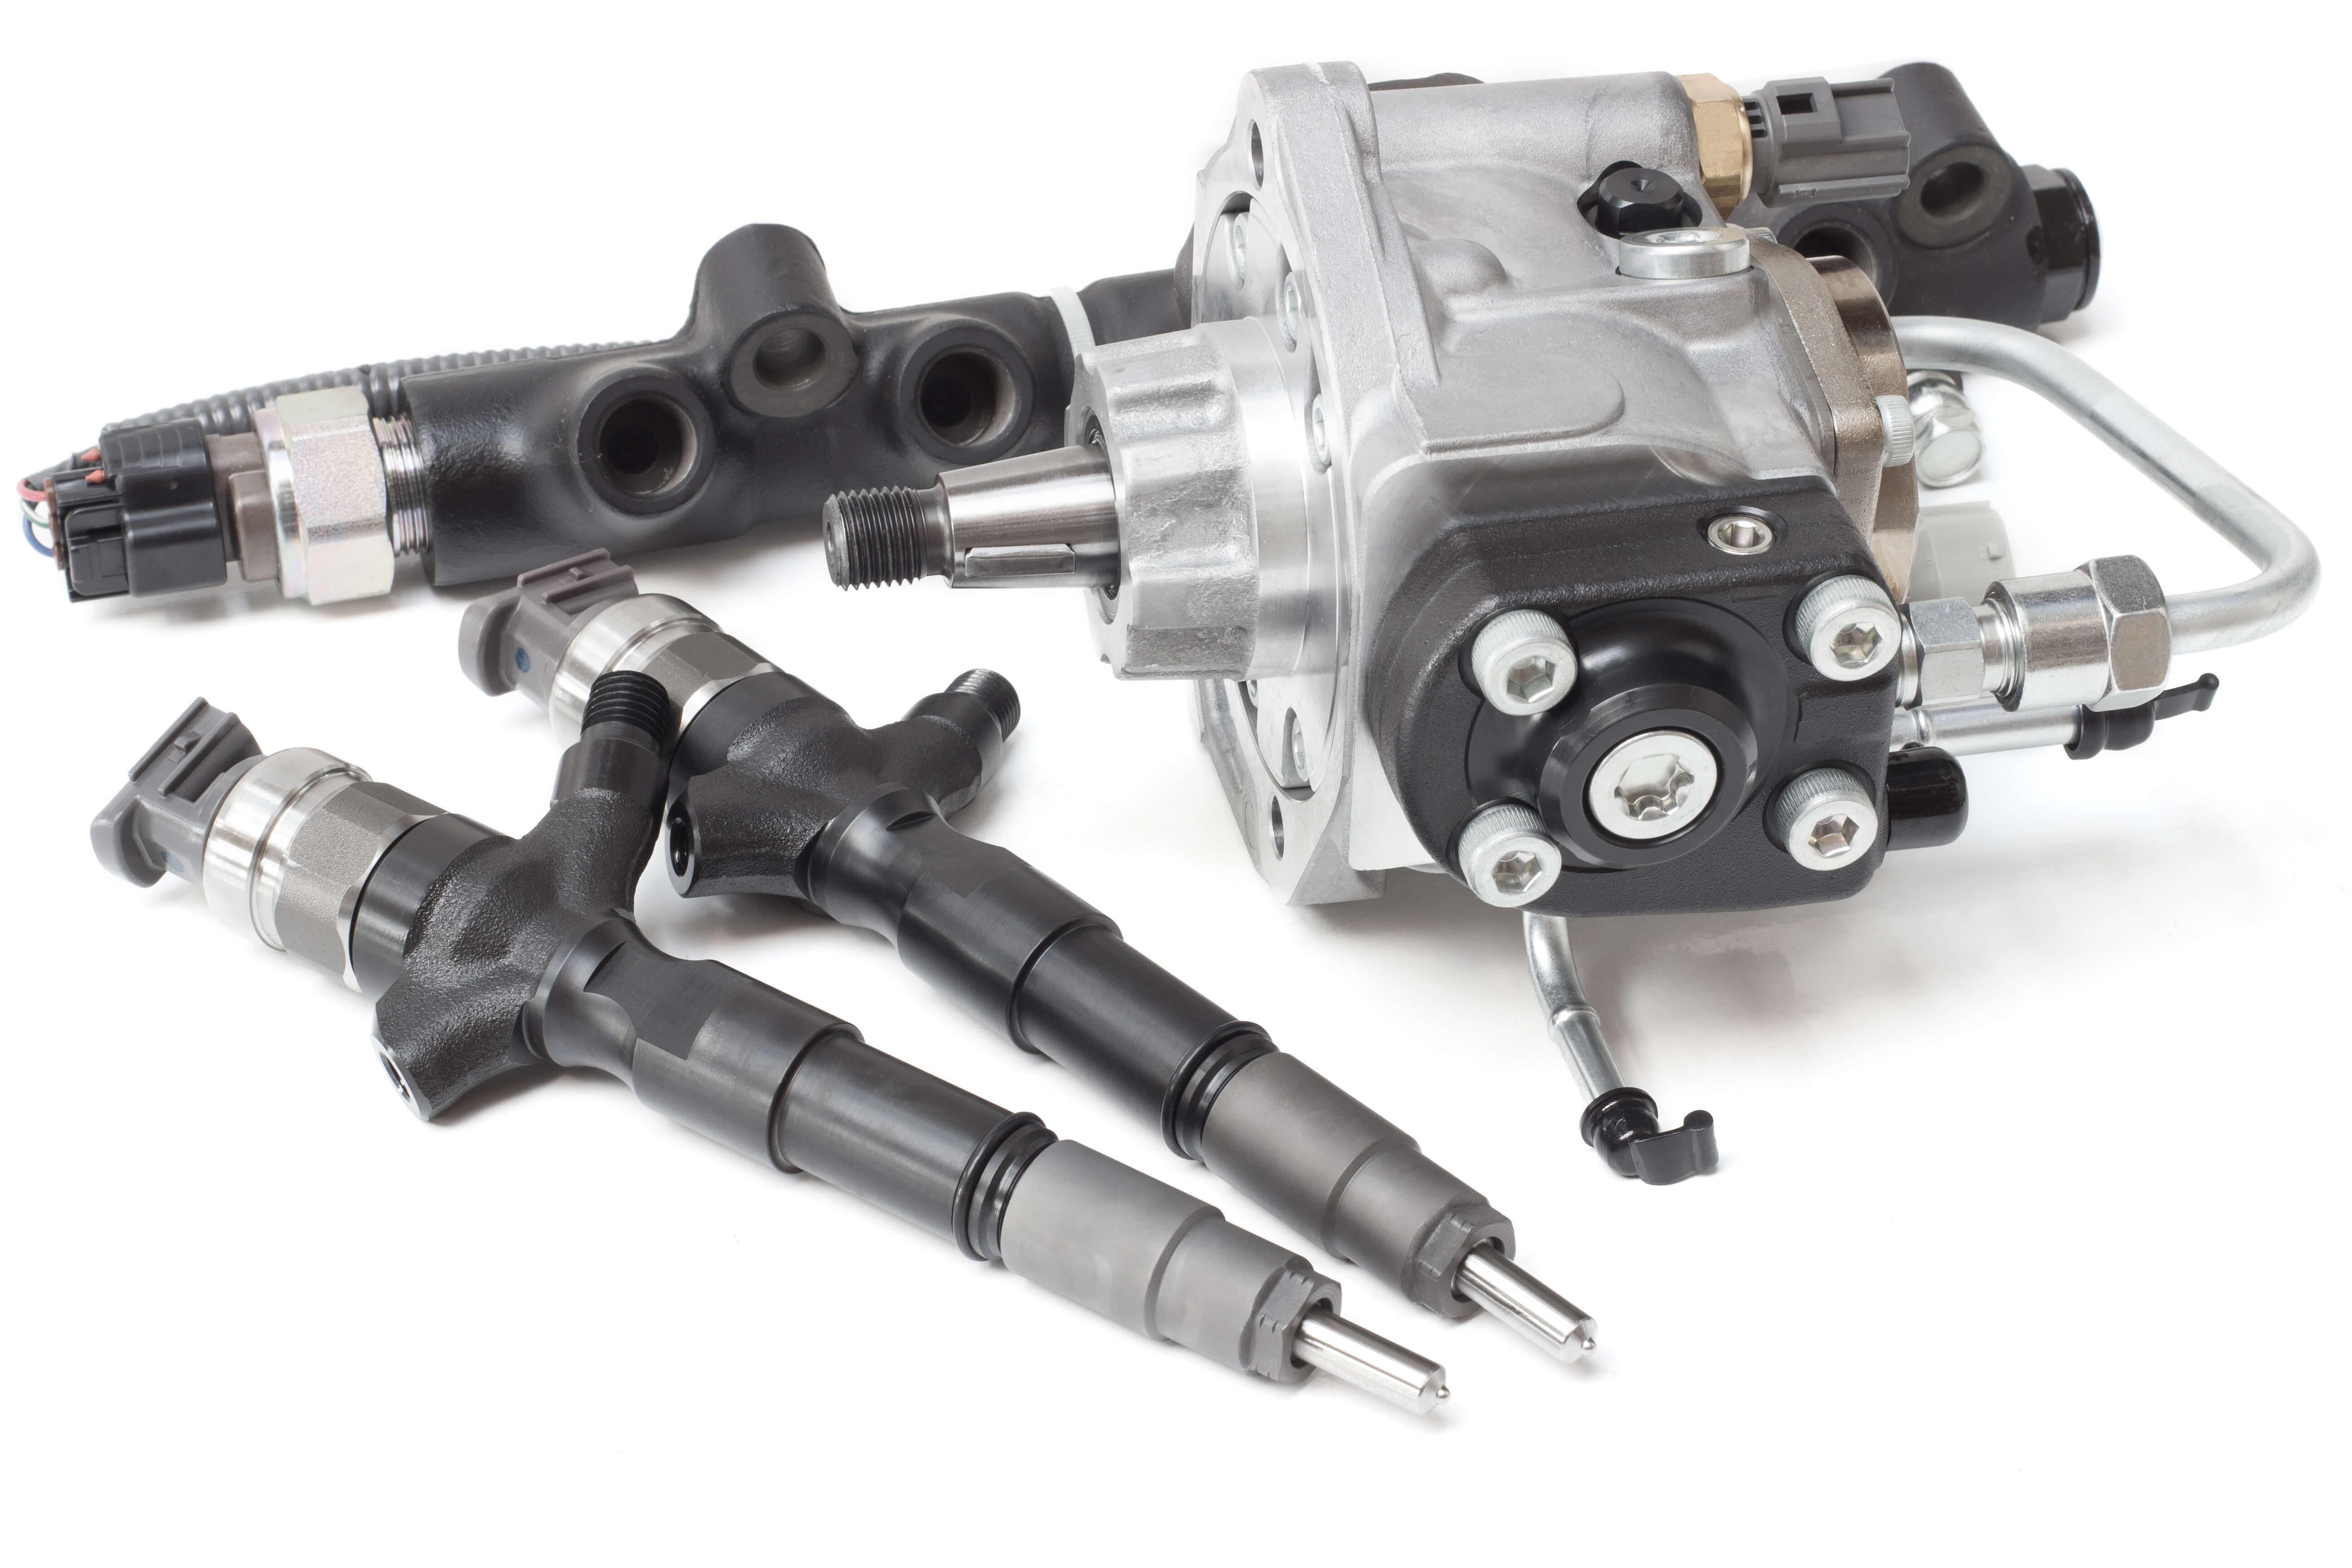 Remanufacture (Reman) Fuel Injection components vs Brand new components